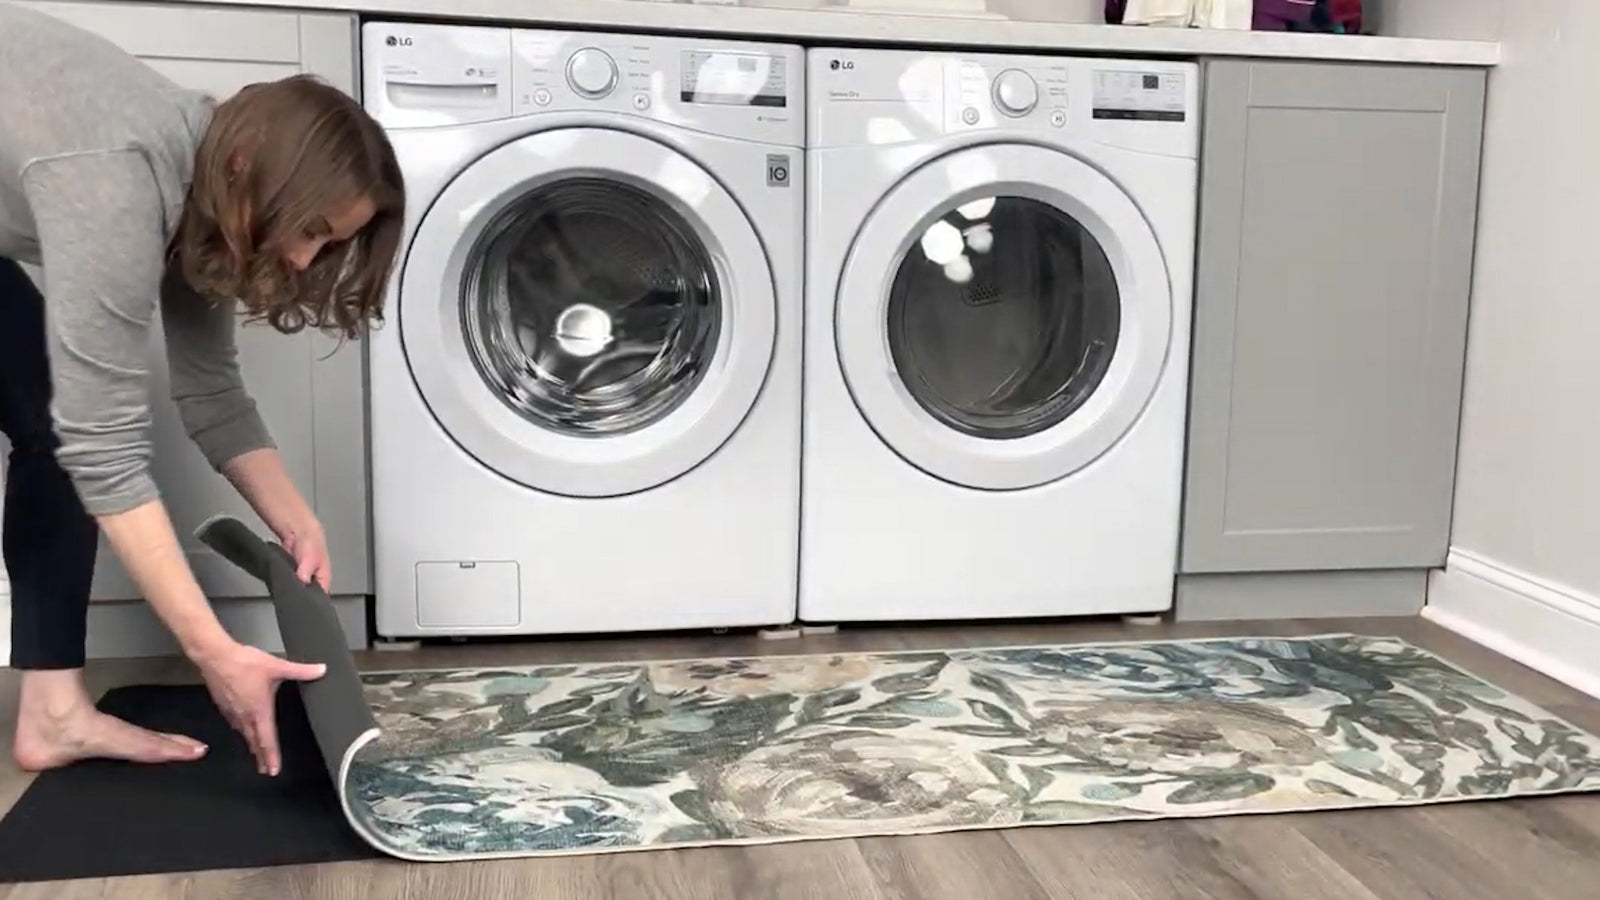 A Guide to How to Machine Wash Your Rugs - Heritage Park Laundry Essentials